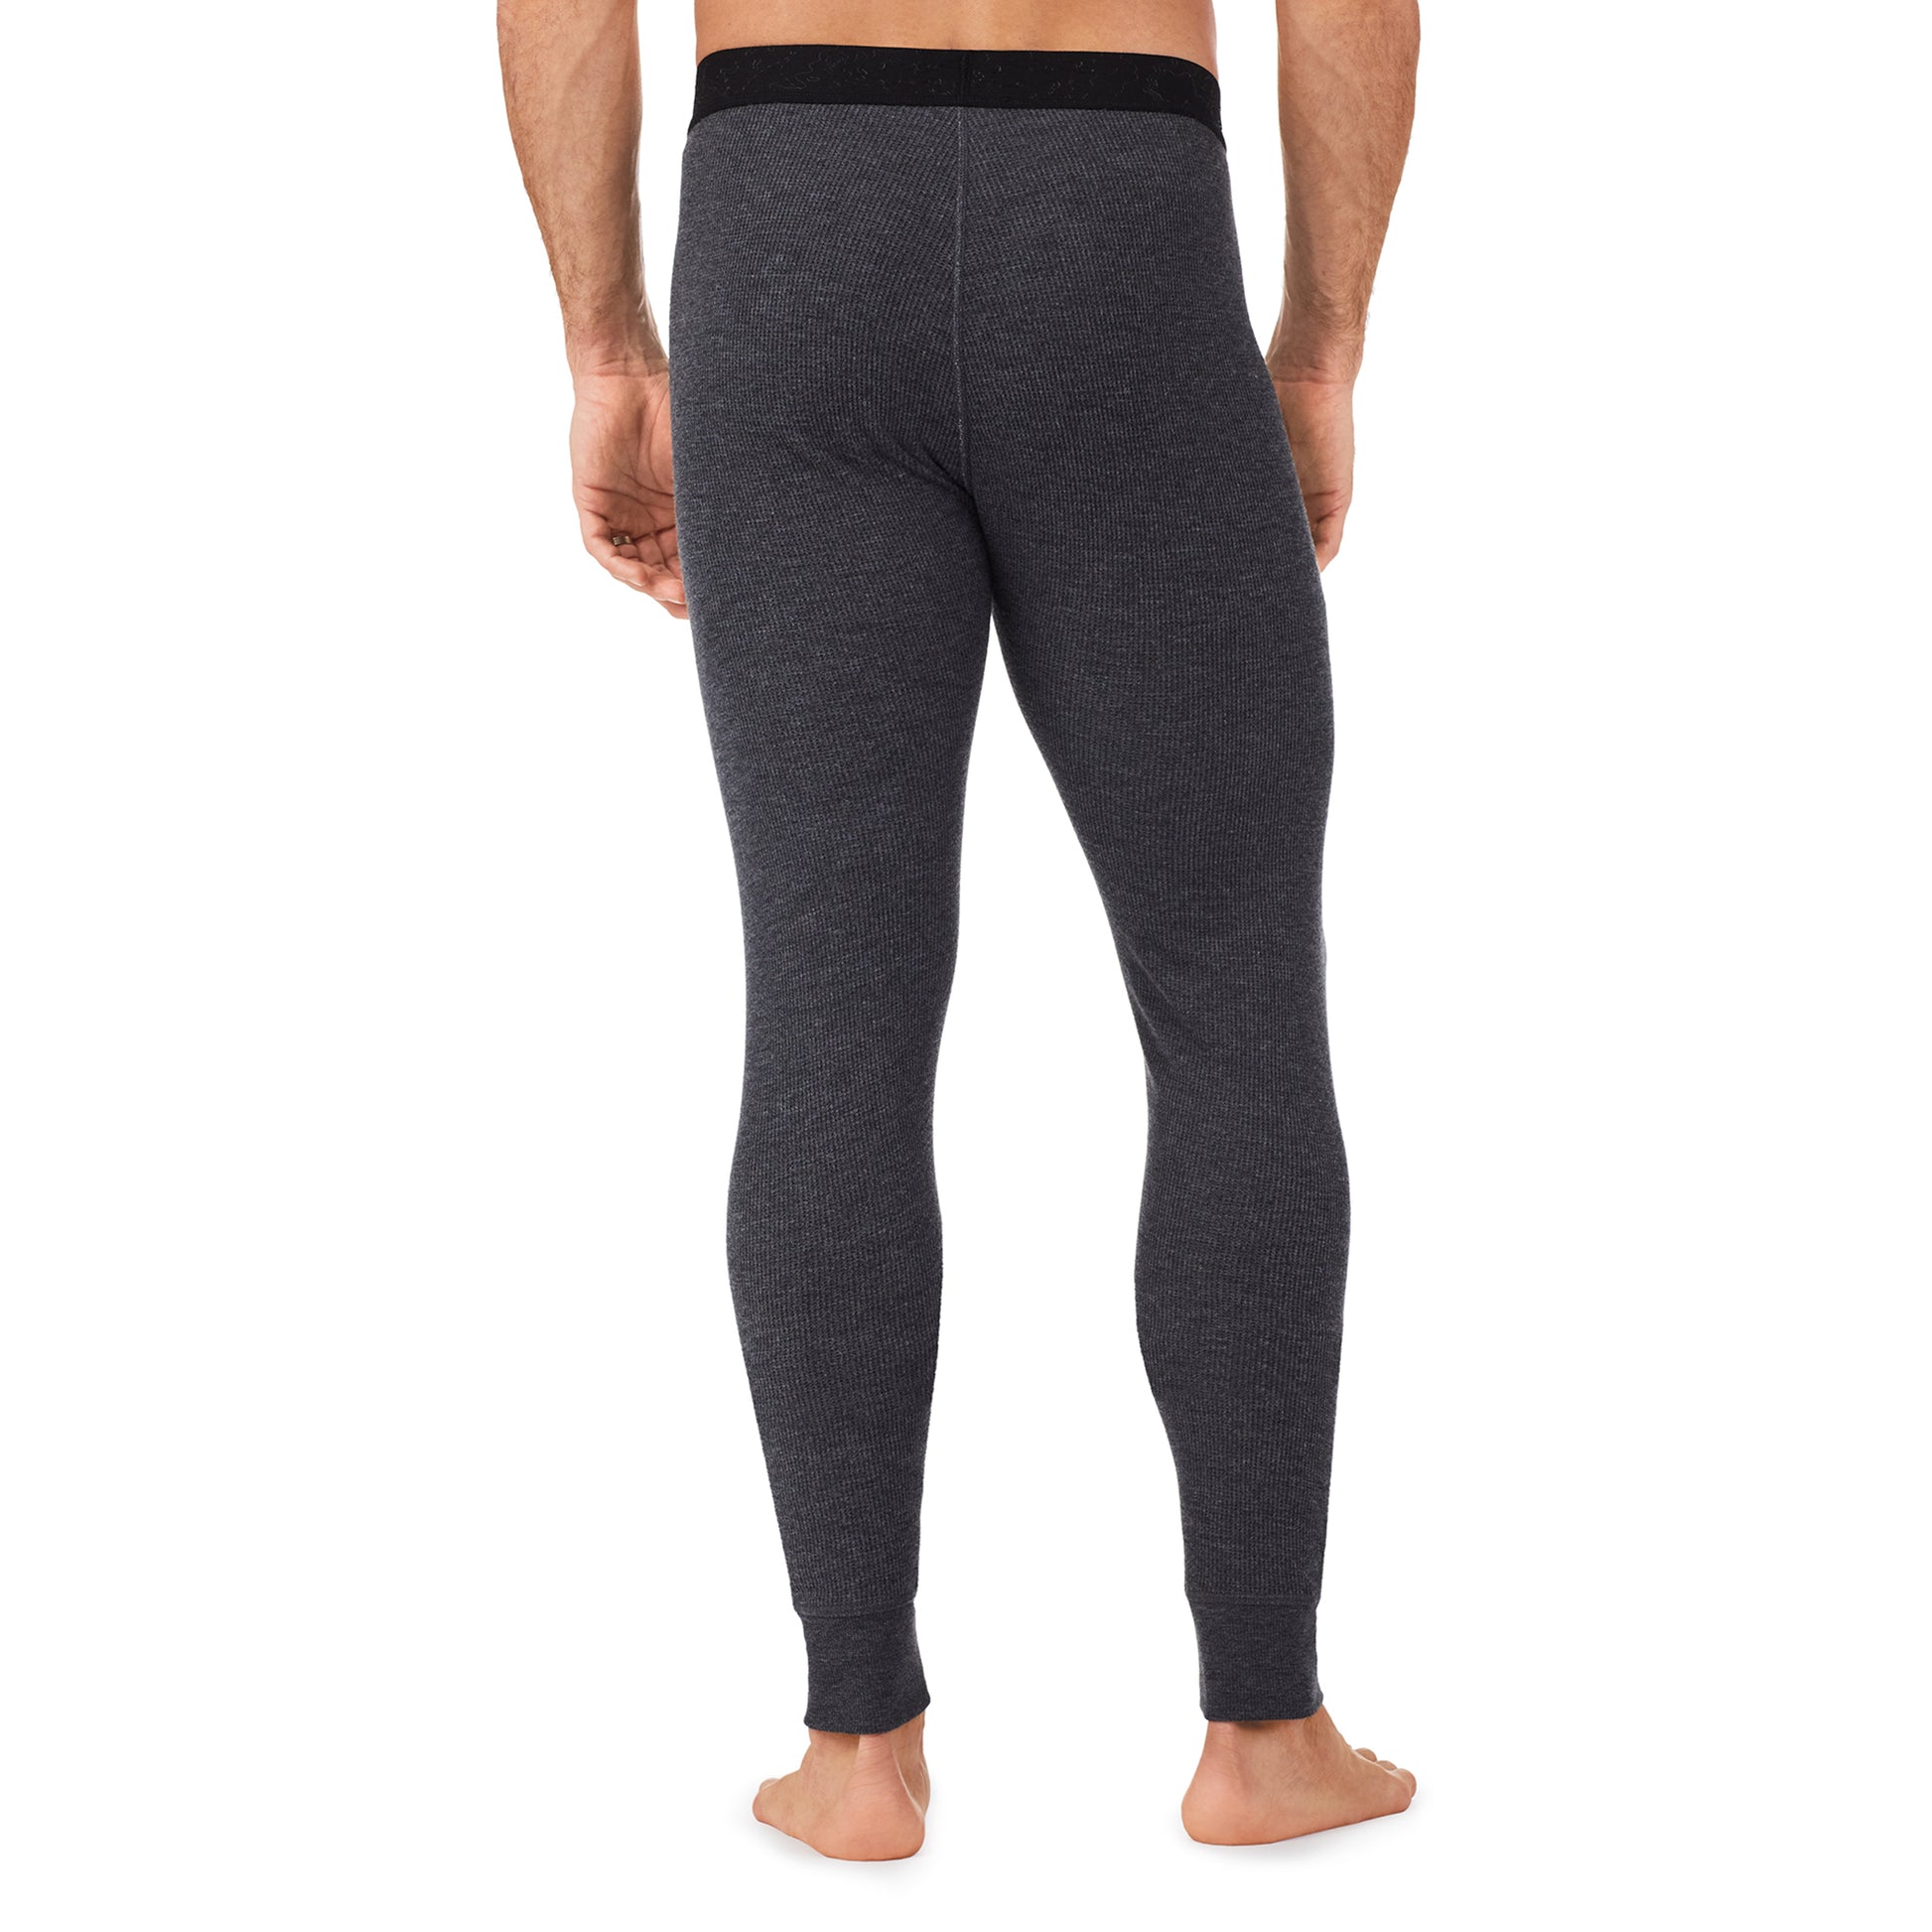 Charcoal Heather; Model is wearing size M. He is 6'1", Waist 31", Inseam 33". @A man wearing a charcoal heather waffle thermal pant.